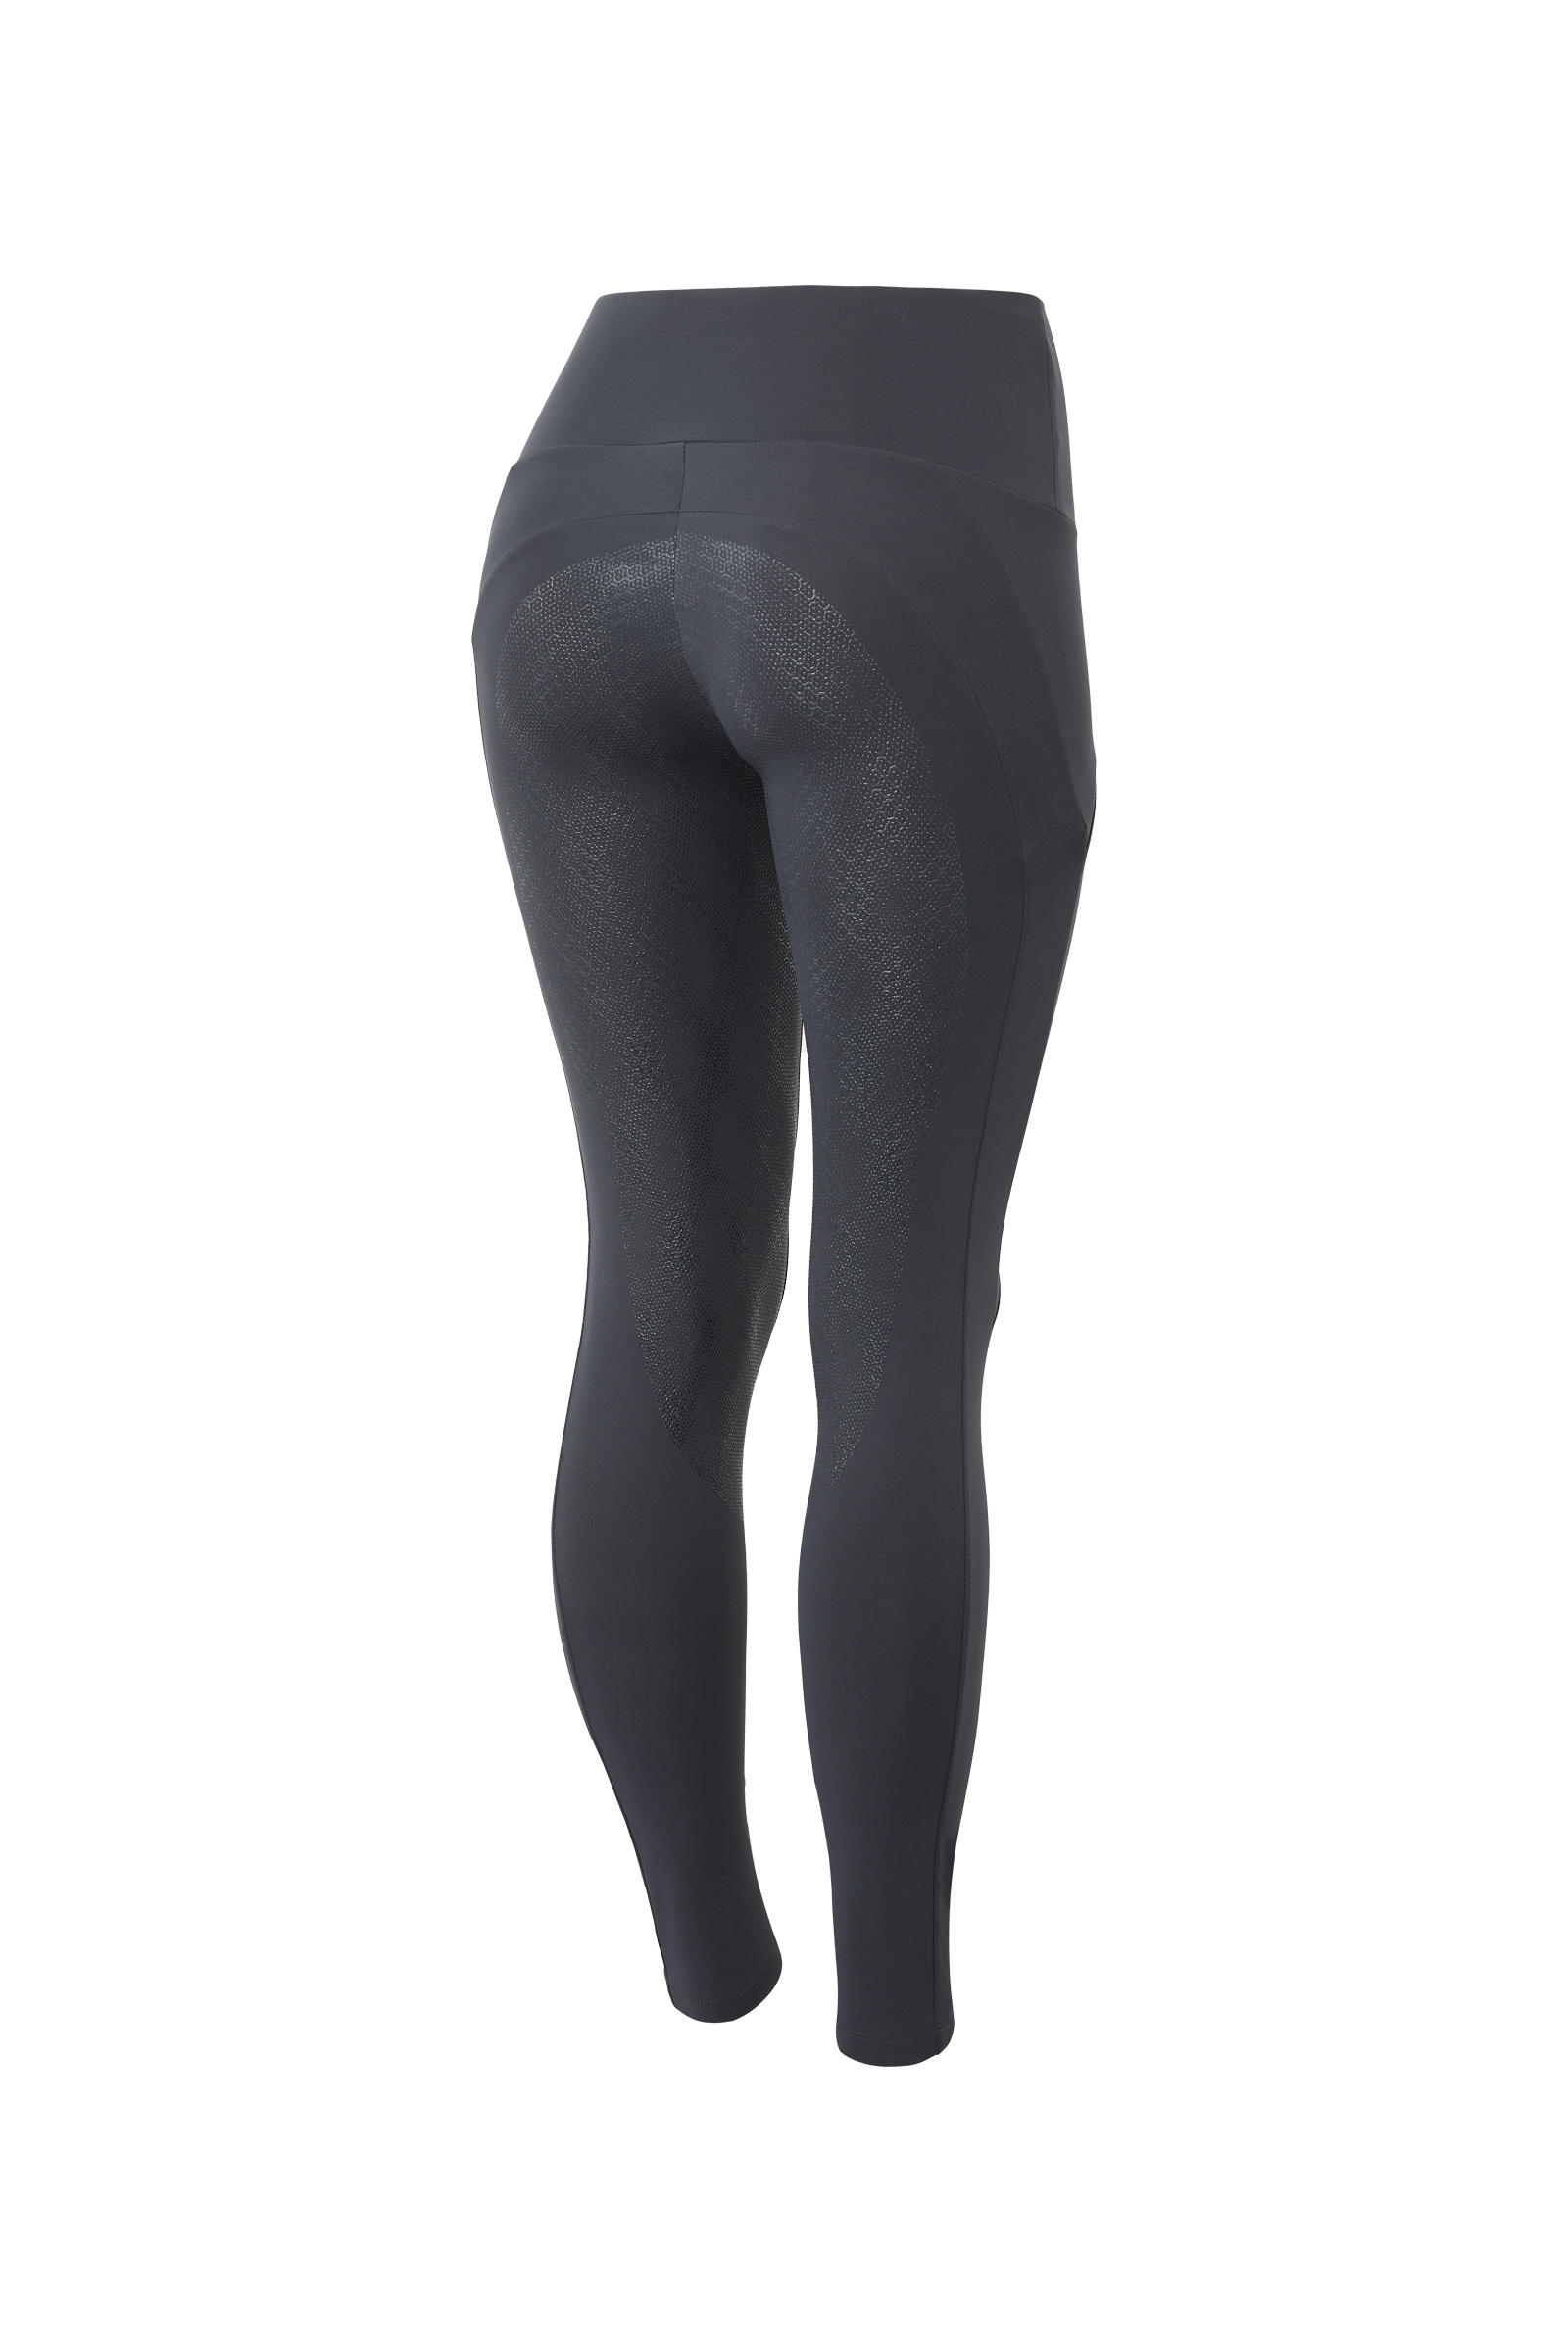 Buy Horze Raquel Women's Full Seat Riding Tights with Phone Pockets